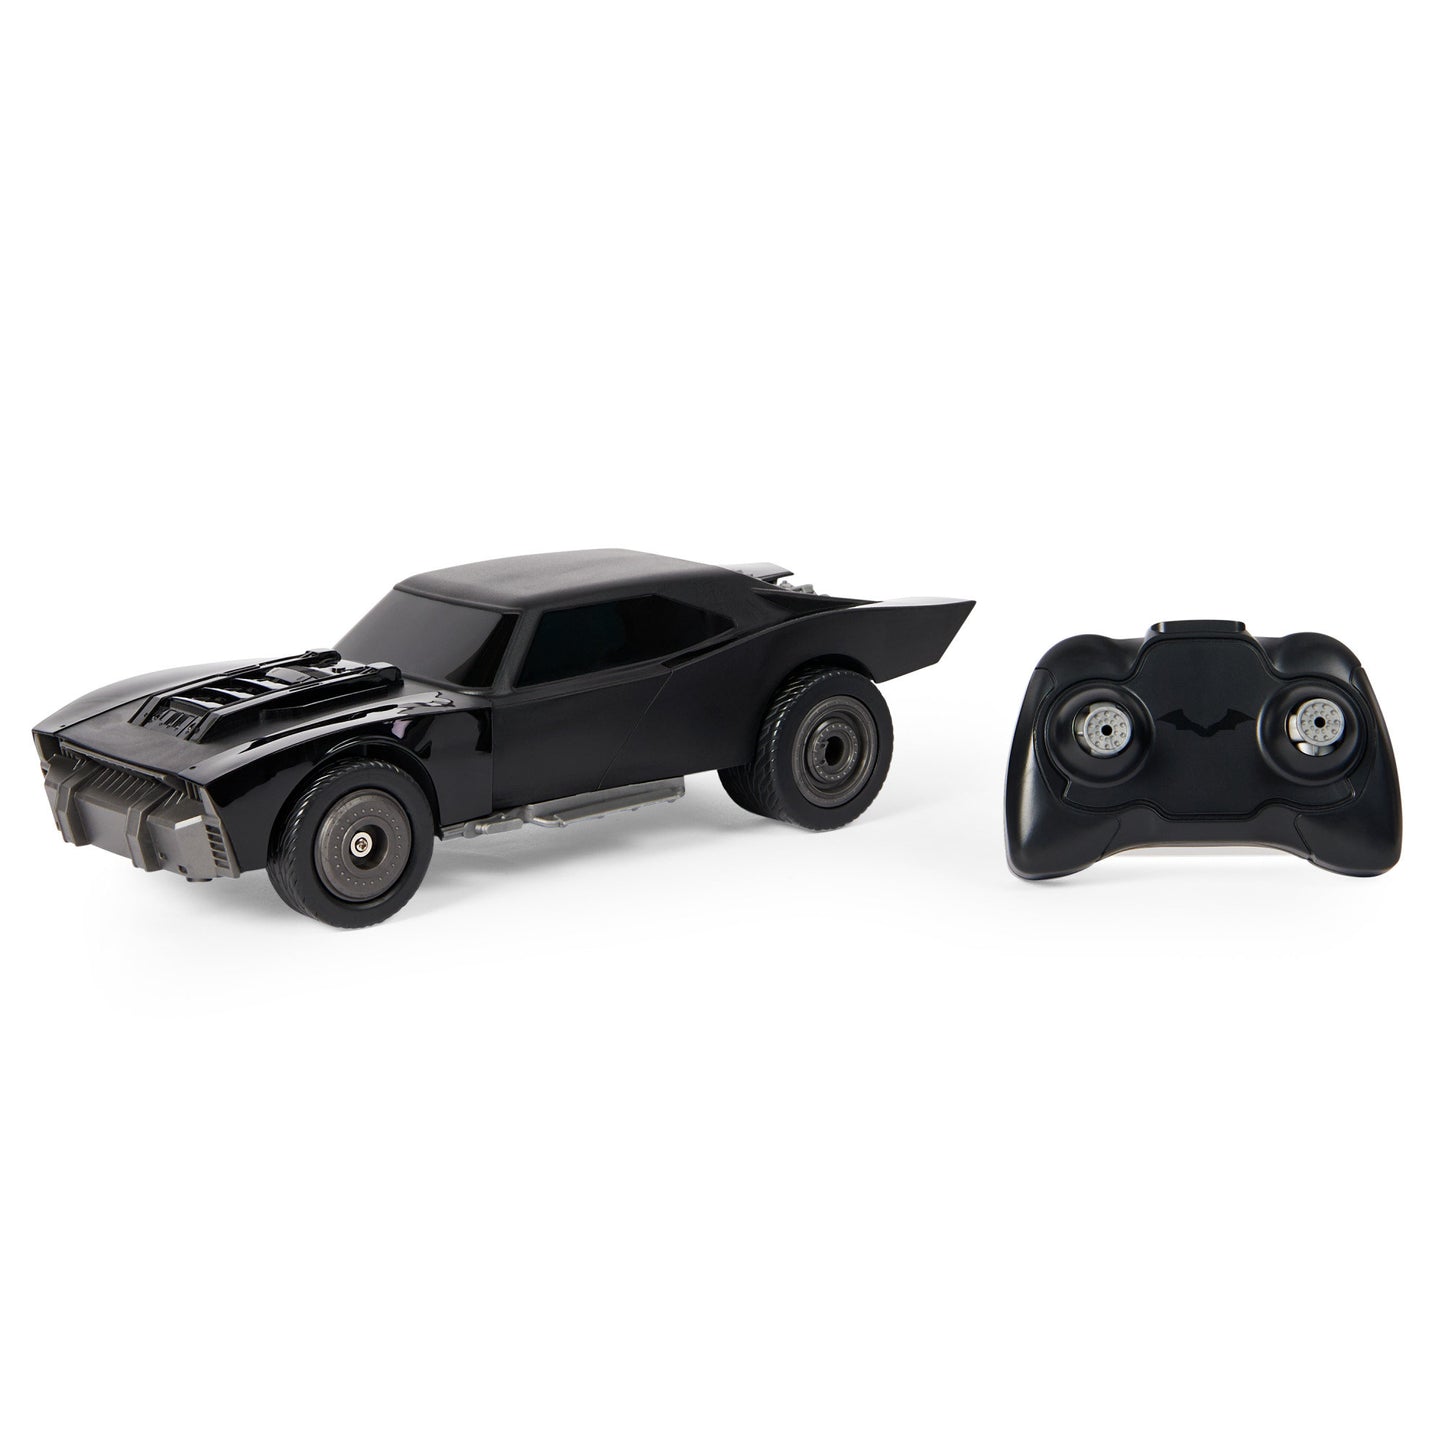 DC Comics, The Batman Batmobile Remote Control Car with Official Batman Movie Styling, Kids Toys for Boys and Girls Ages 4 and Up-Large